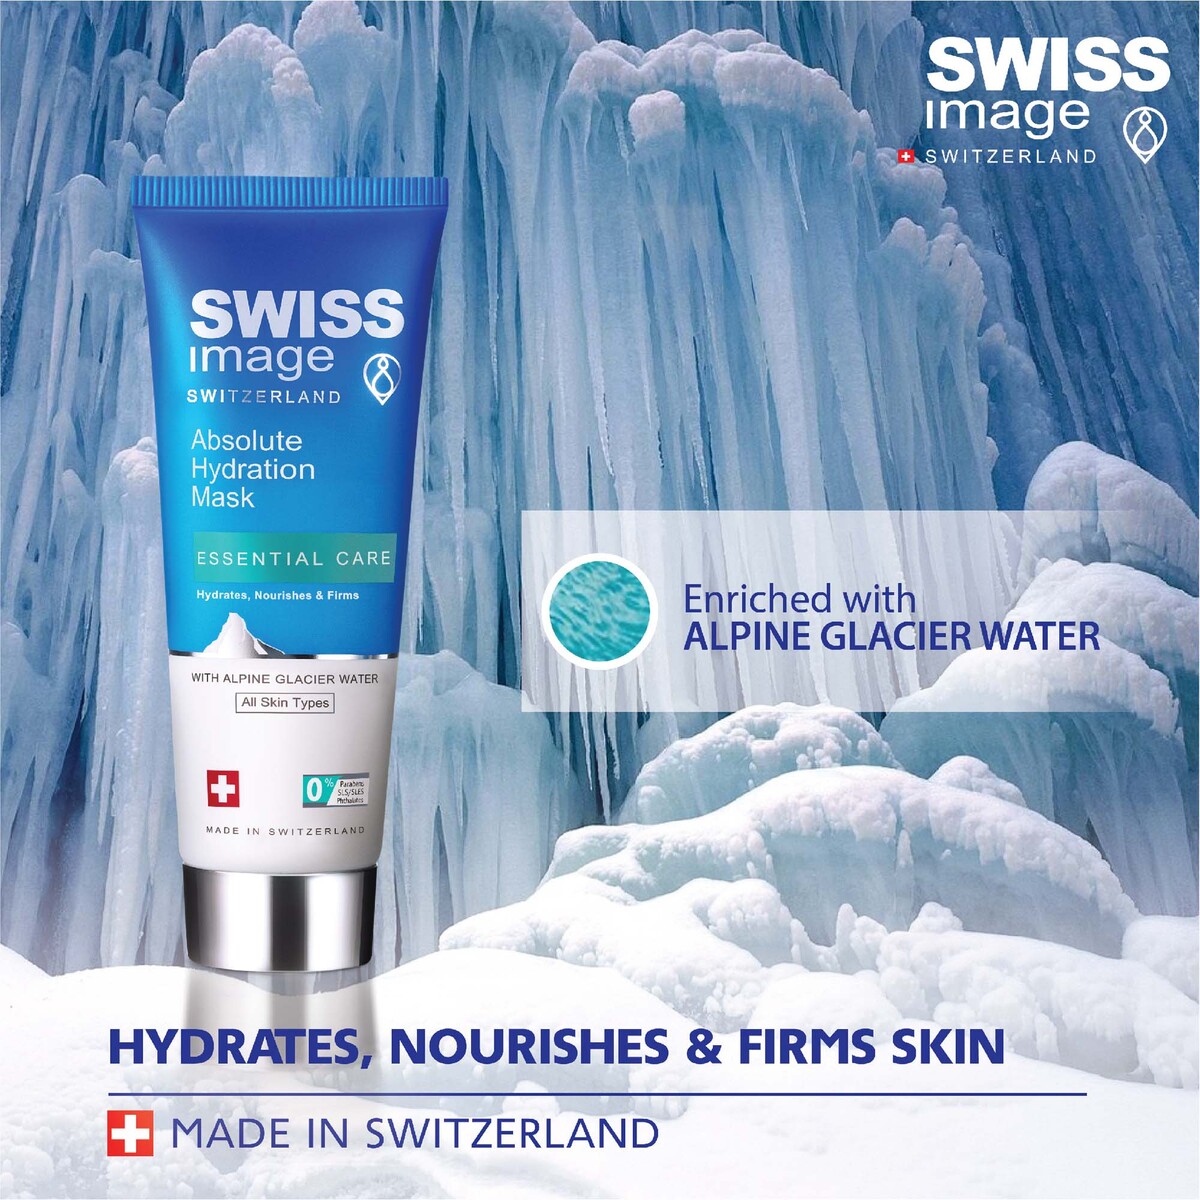 Swiss Image Essential Care Absolute Hydration Mask 75 ml